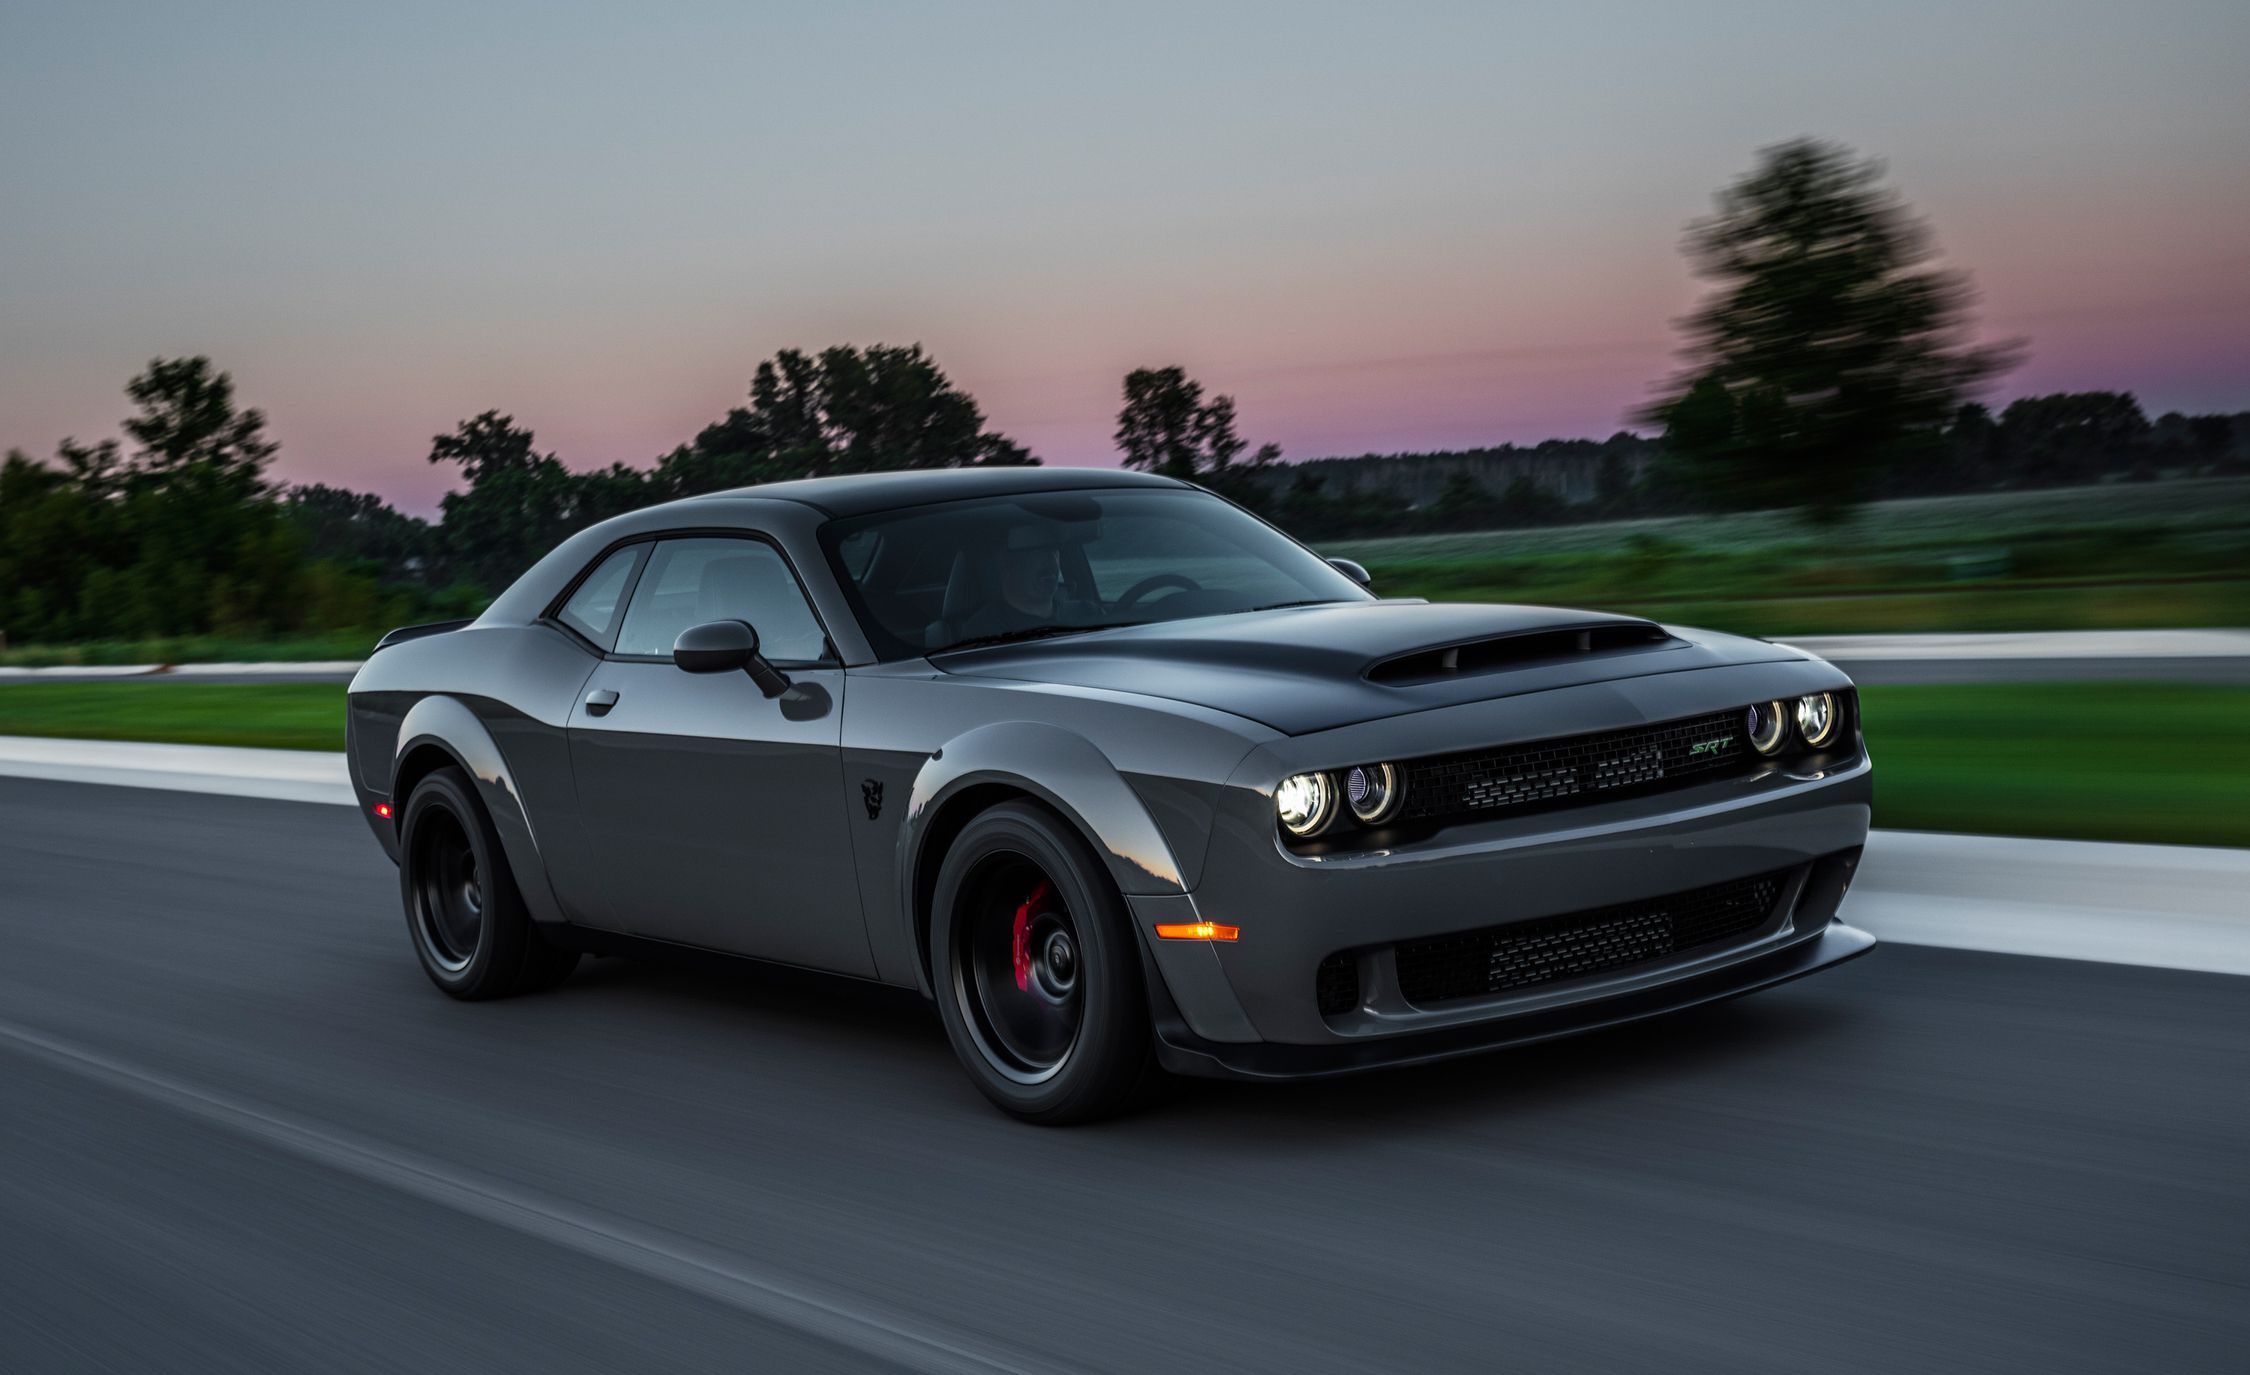 2018 Dodge Challenger SRT Demon Review, Pricing, and Specs